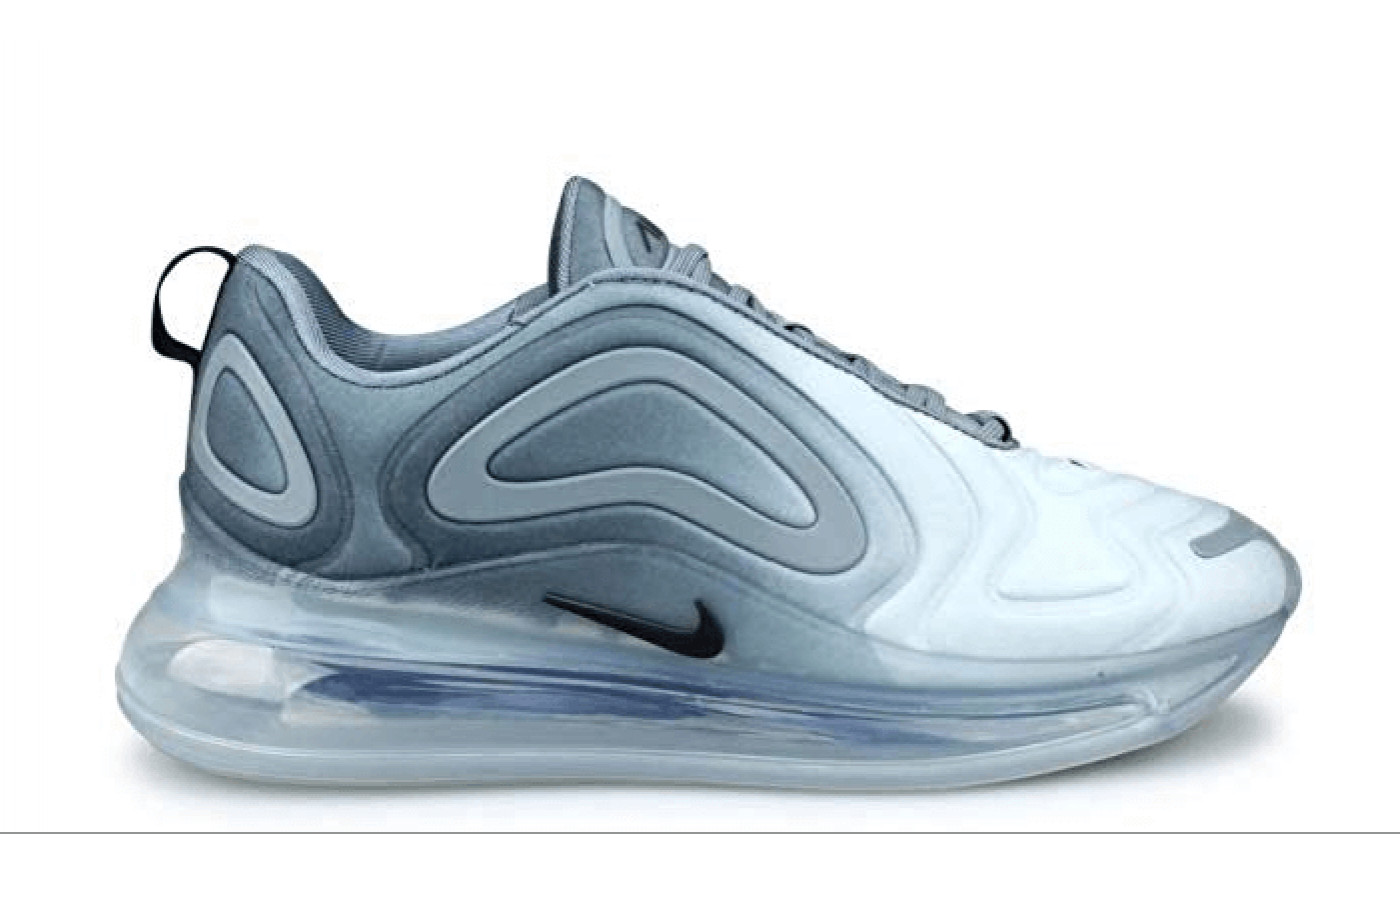 The Air Max 720 is available in multiple colorways.